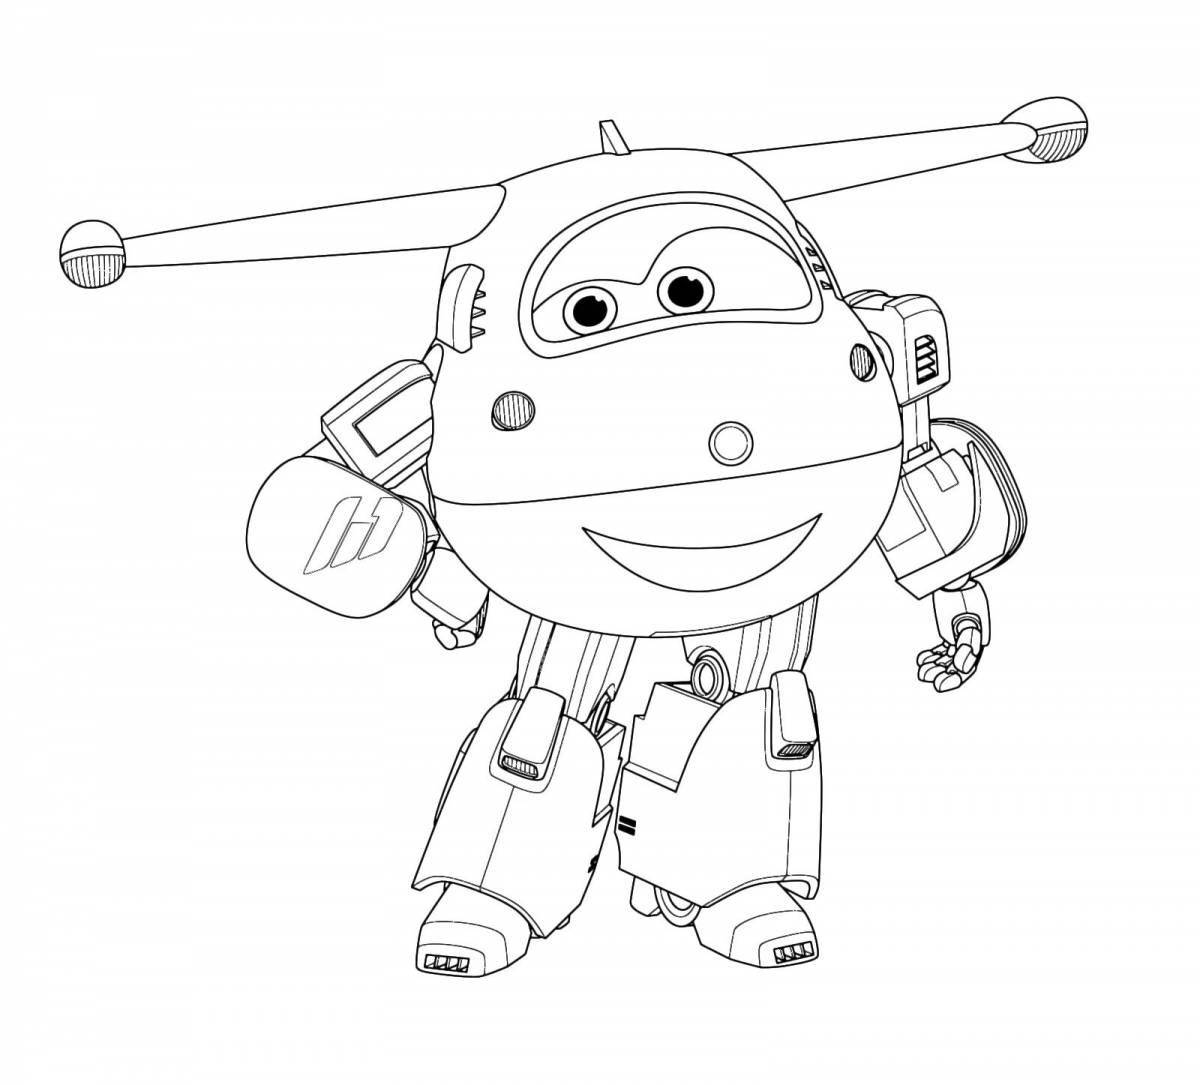 Dazzling Crystal Super Wings coloring page